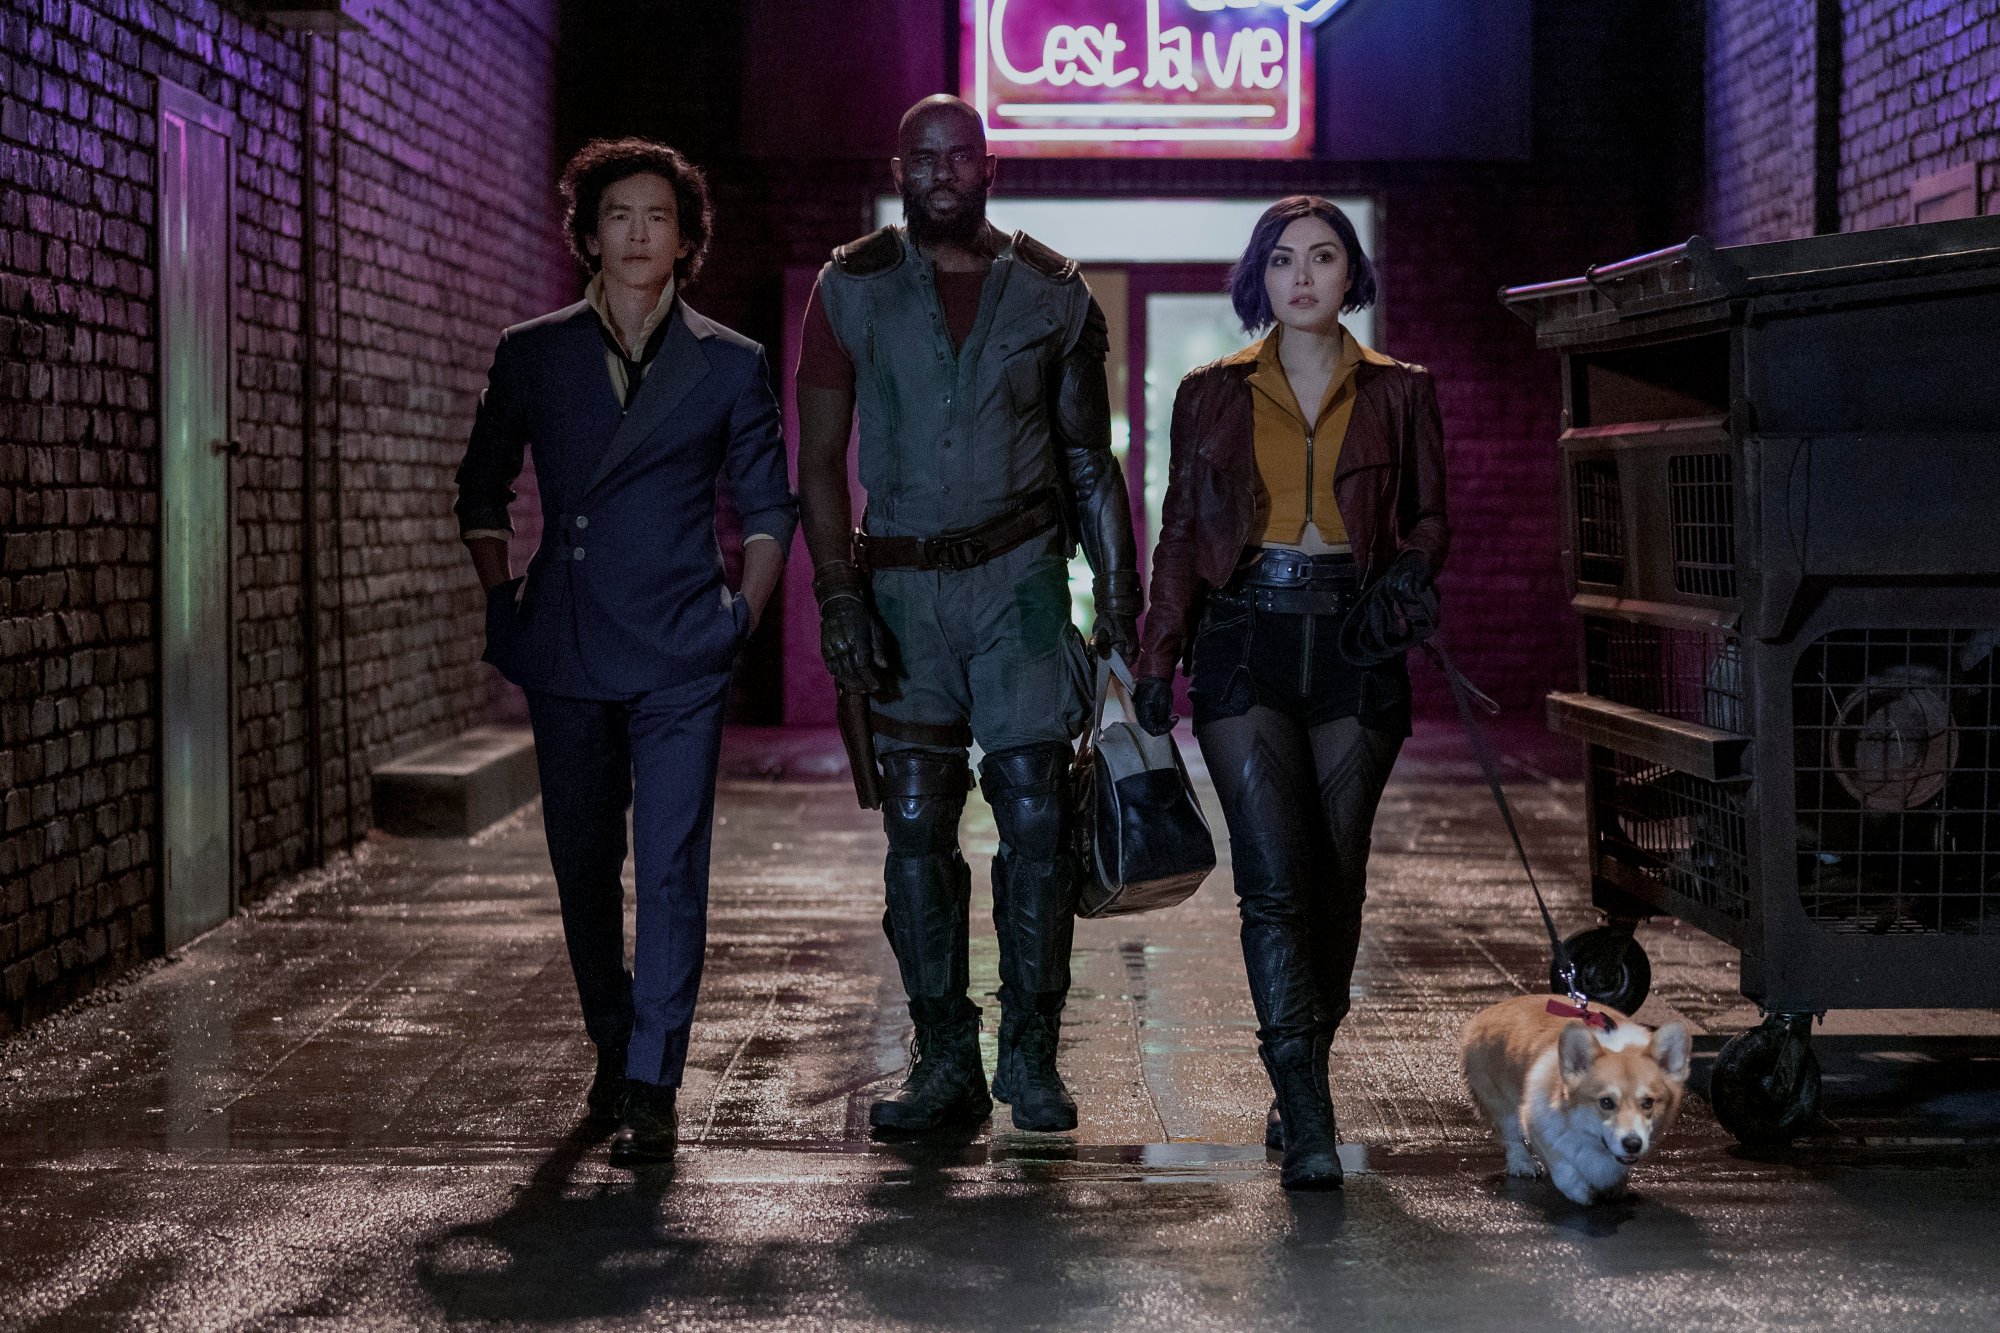 John Cho, Mustafa Shakir, and Daniella Pineda in Netflix's live-action 'Cowboy Bebop.' The three are walking next to one another, with Ein the corgi/alien next to them. Fans are wondering if the 'Cowboy Bebop' adaptation will feature Ed as well.